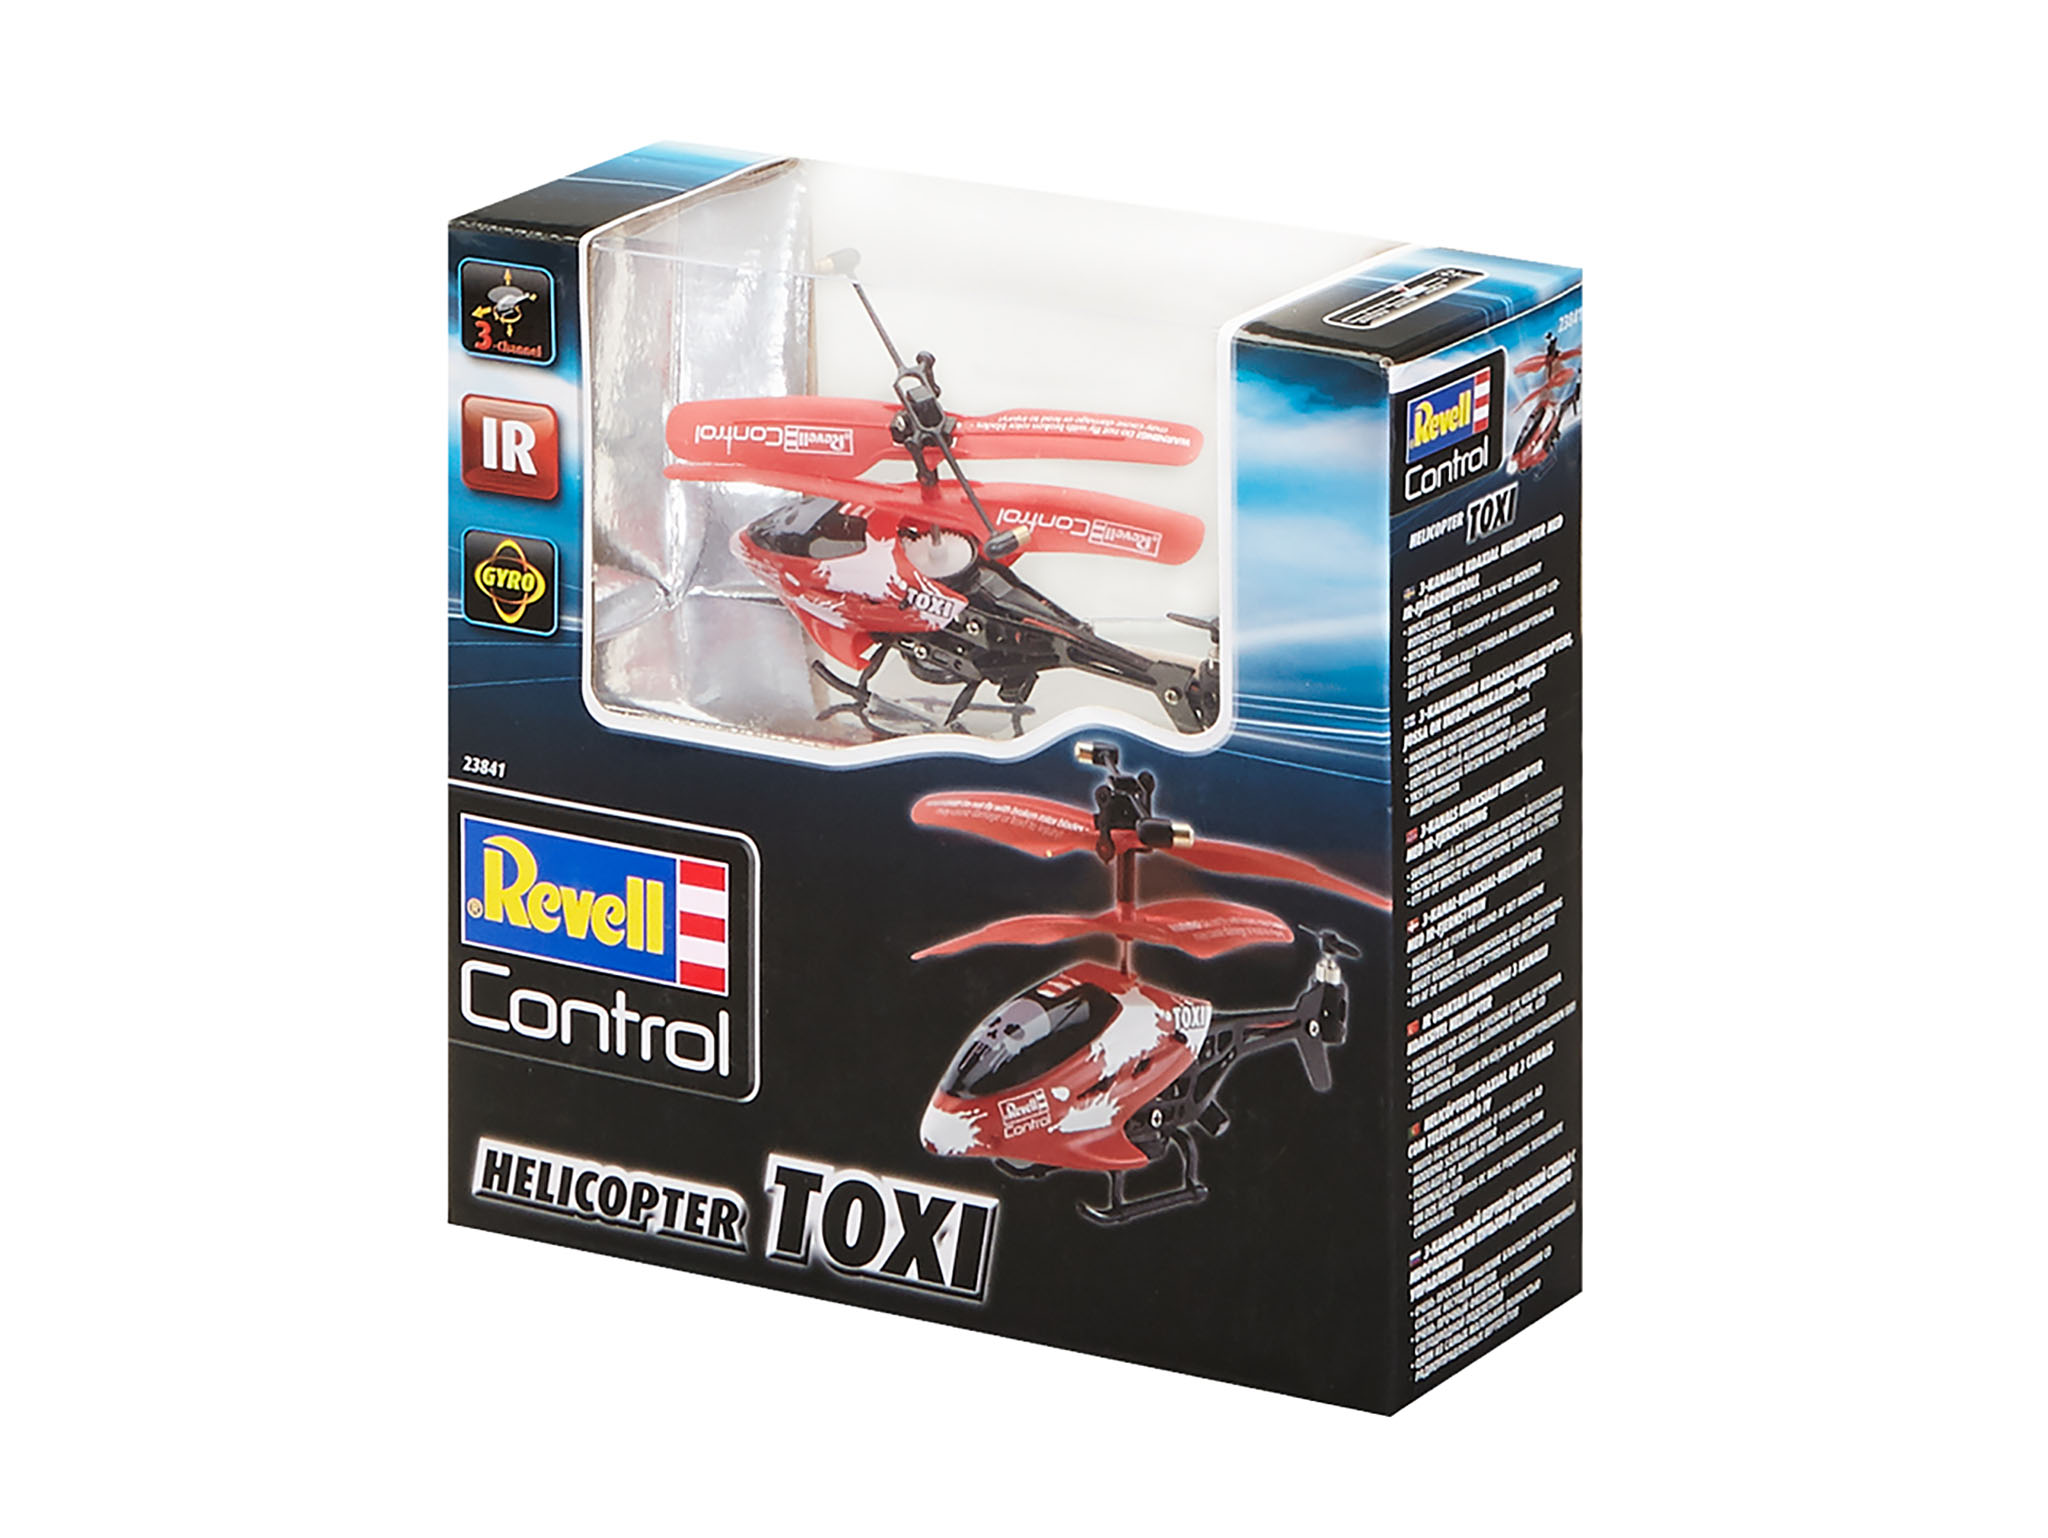 Rot Mehrfarbig Toxi Helicopter, REVELL